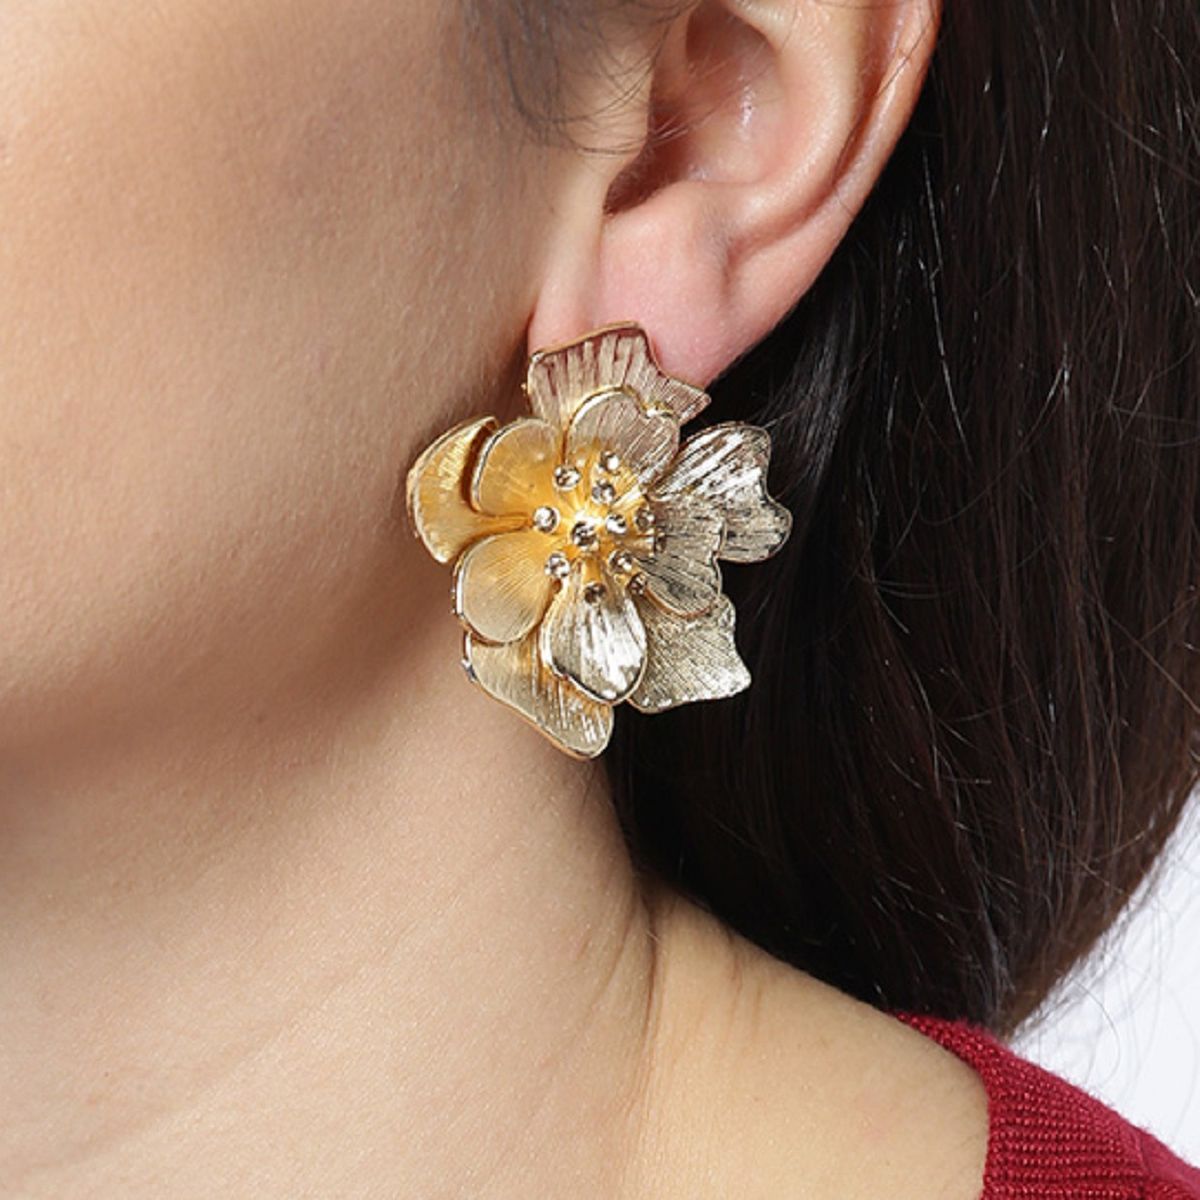 Fabula Gold Plated Oversized Large Crystal Encrusted Floral Ear Stud  Earrings Buy Fabula Gold Plated Oversized Large Crystal Encrusted Floral  Ear Stud Earrings Online at Best Price in India  Nykaa